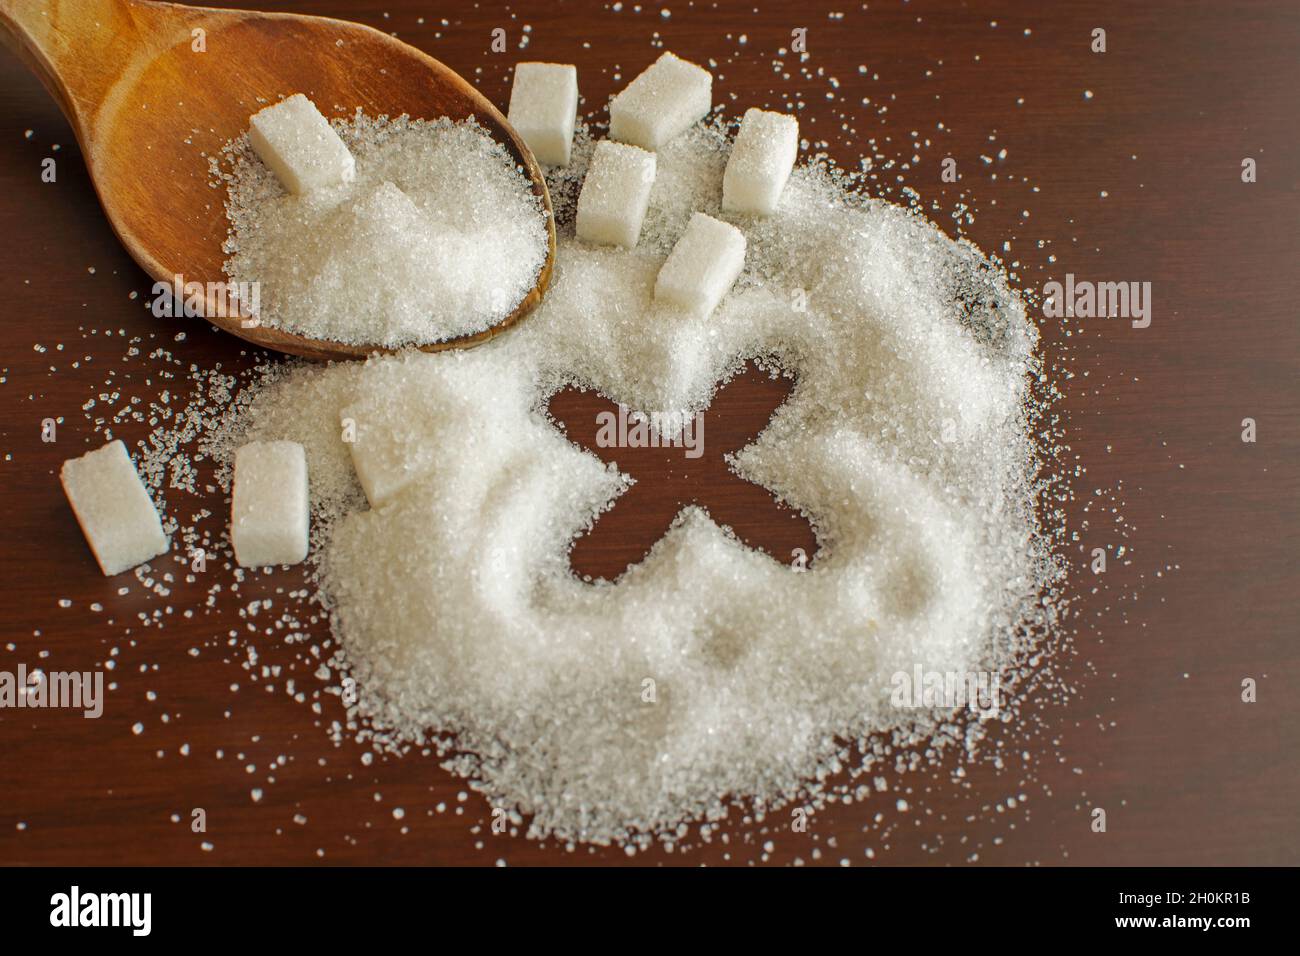 Stop sign sugar warns that too much sugar will make an unhealthy diet, obesity, diabetes, dental care and much more. Stock Photo